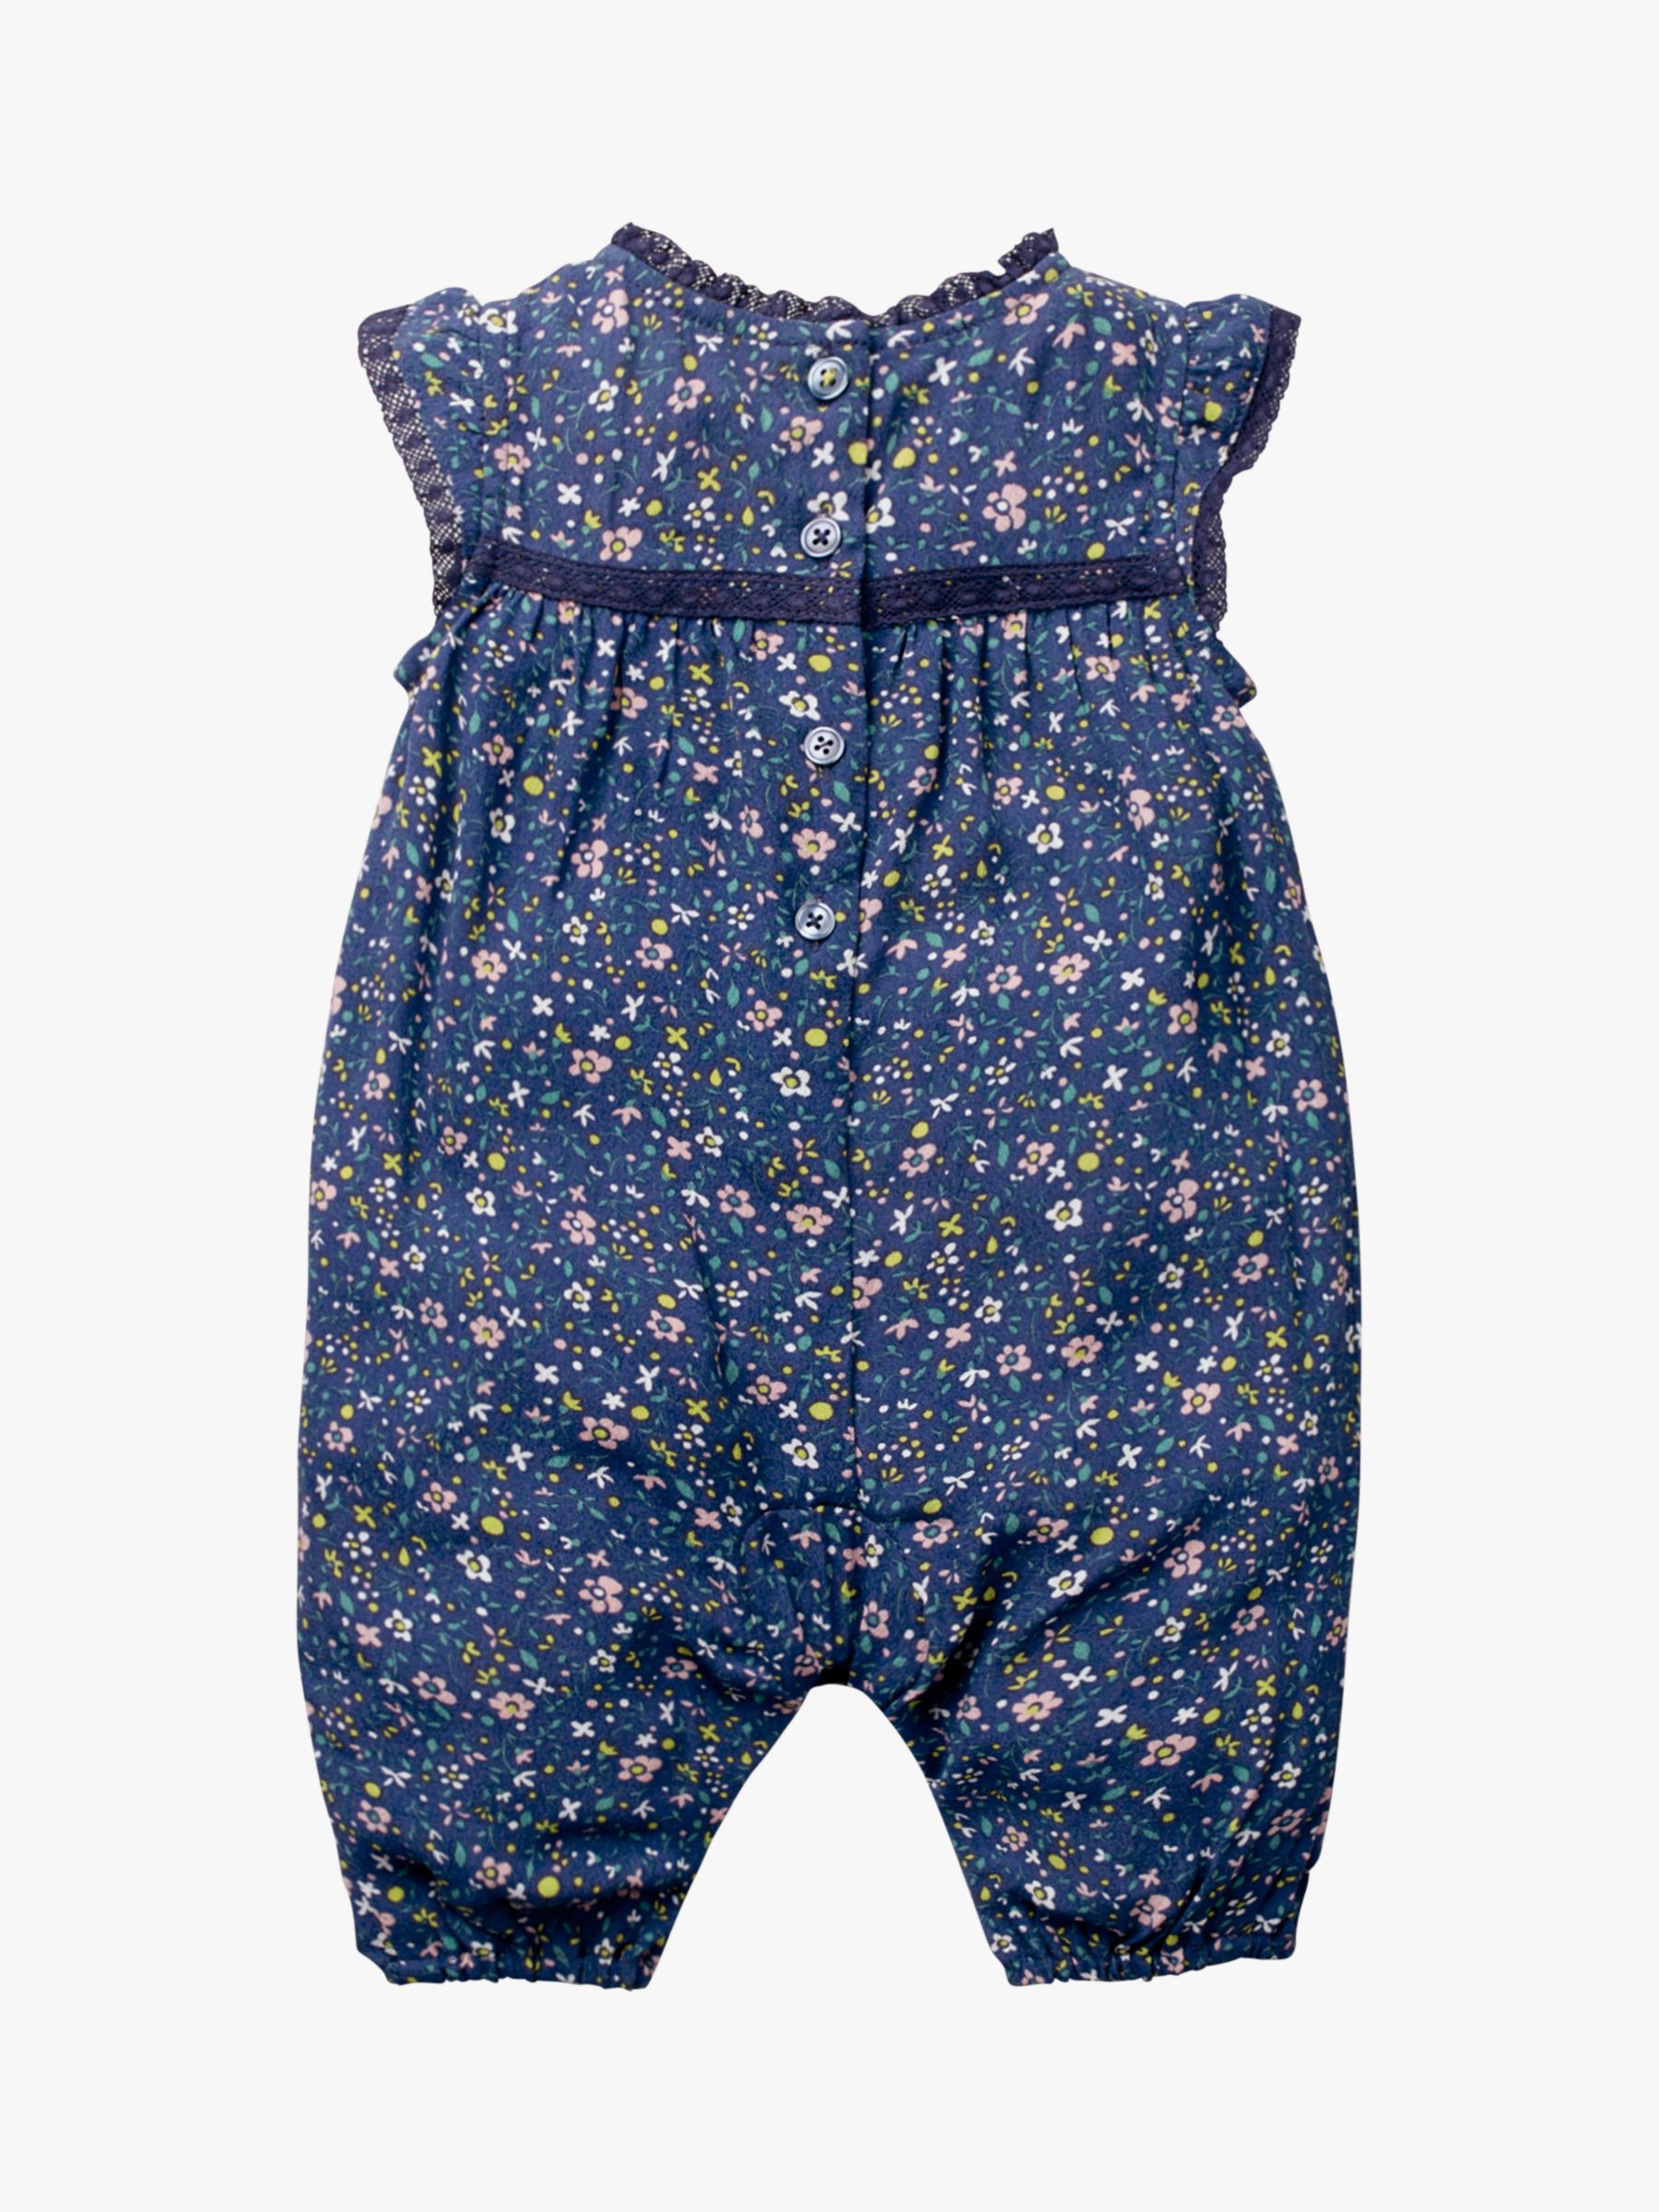 Mini Boden Baby Pretty Floral Romper, Blue at John Lewis & Partners